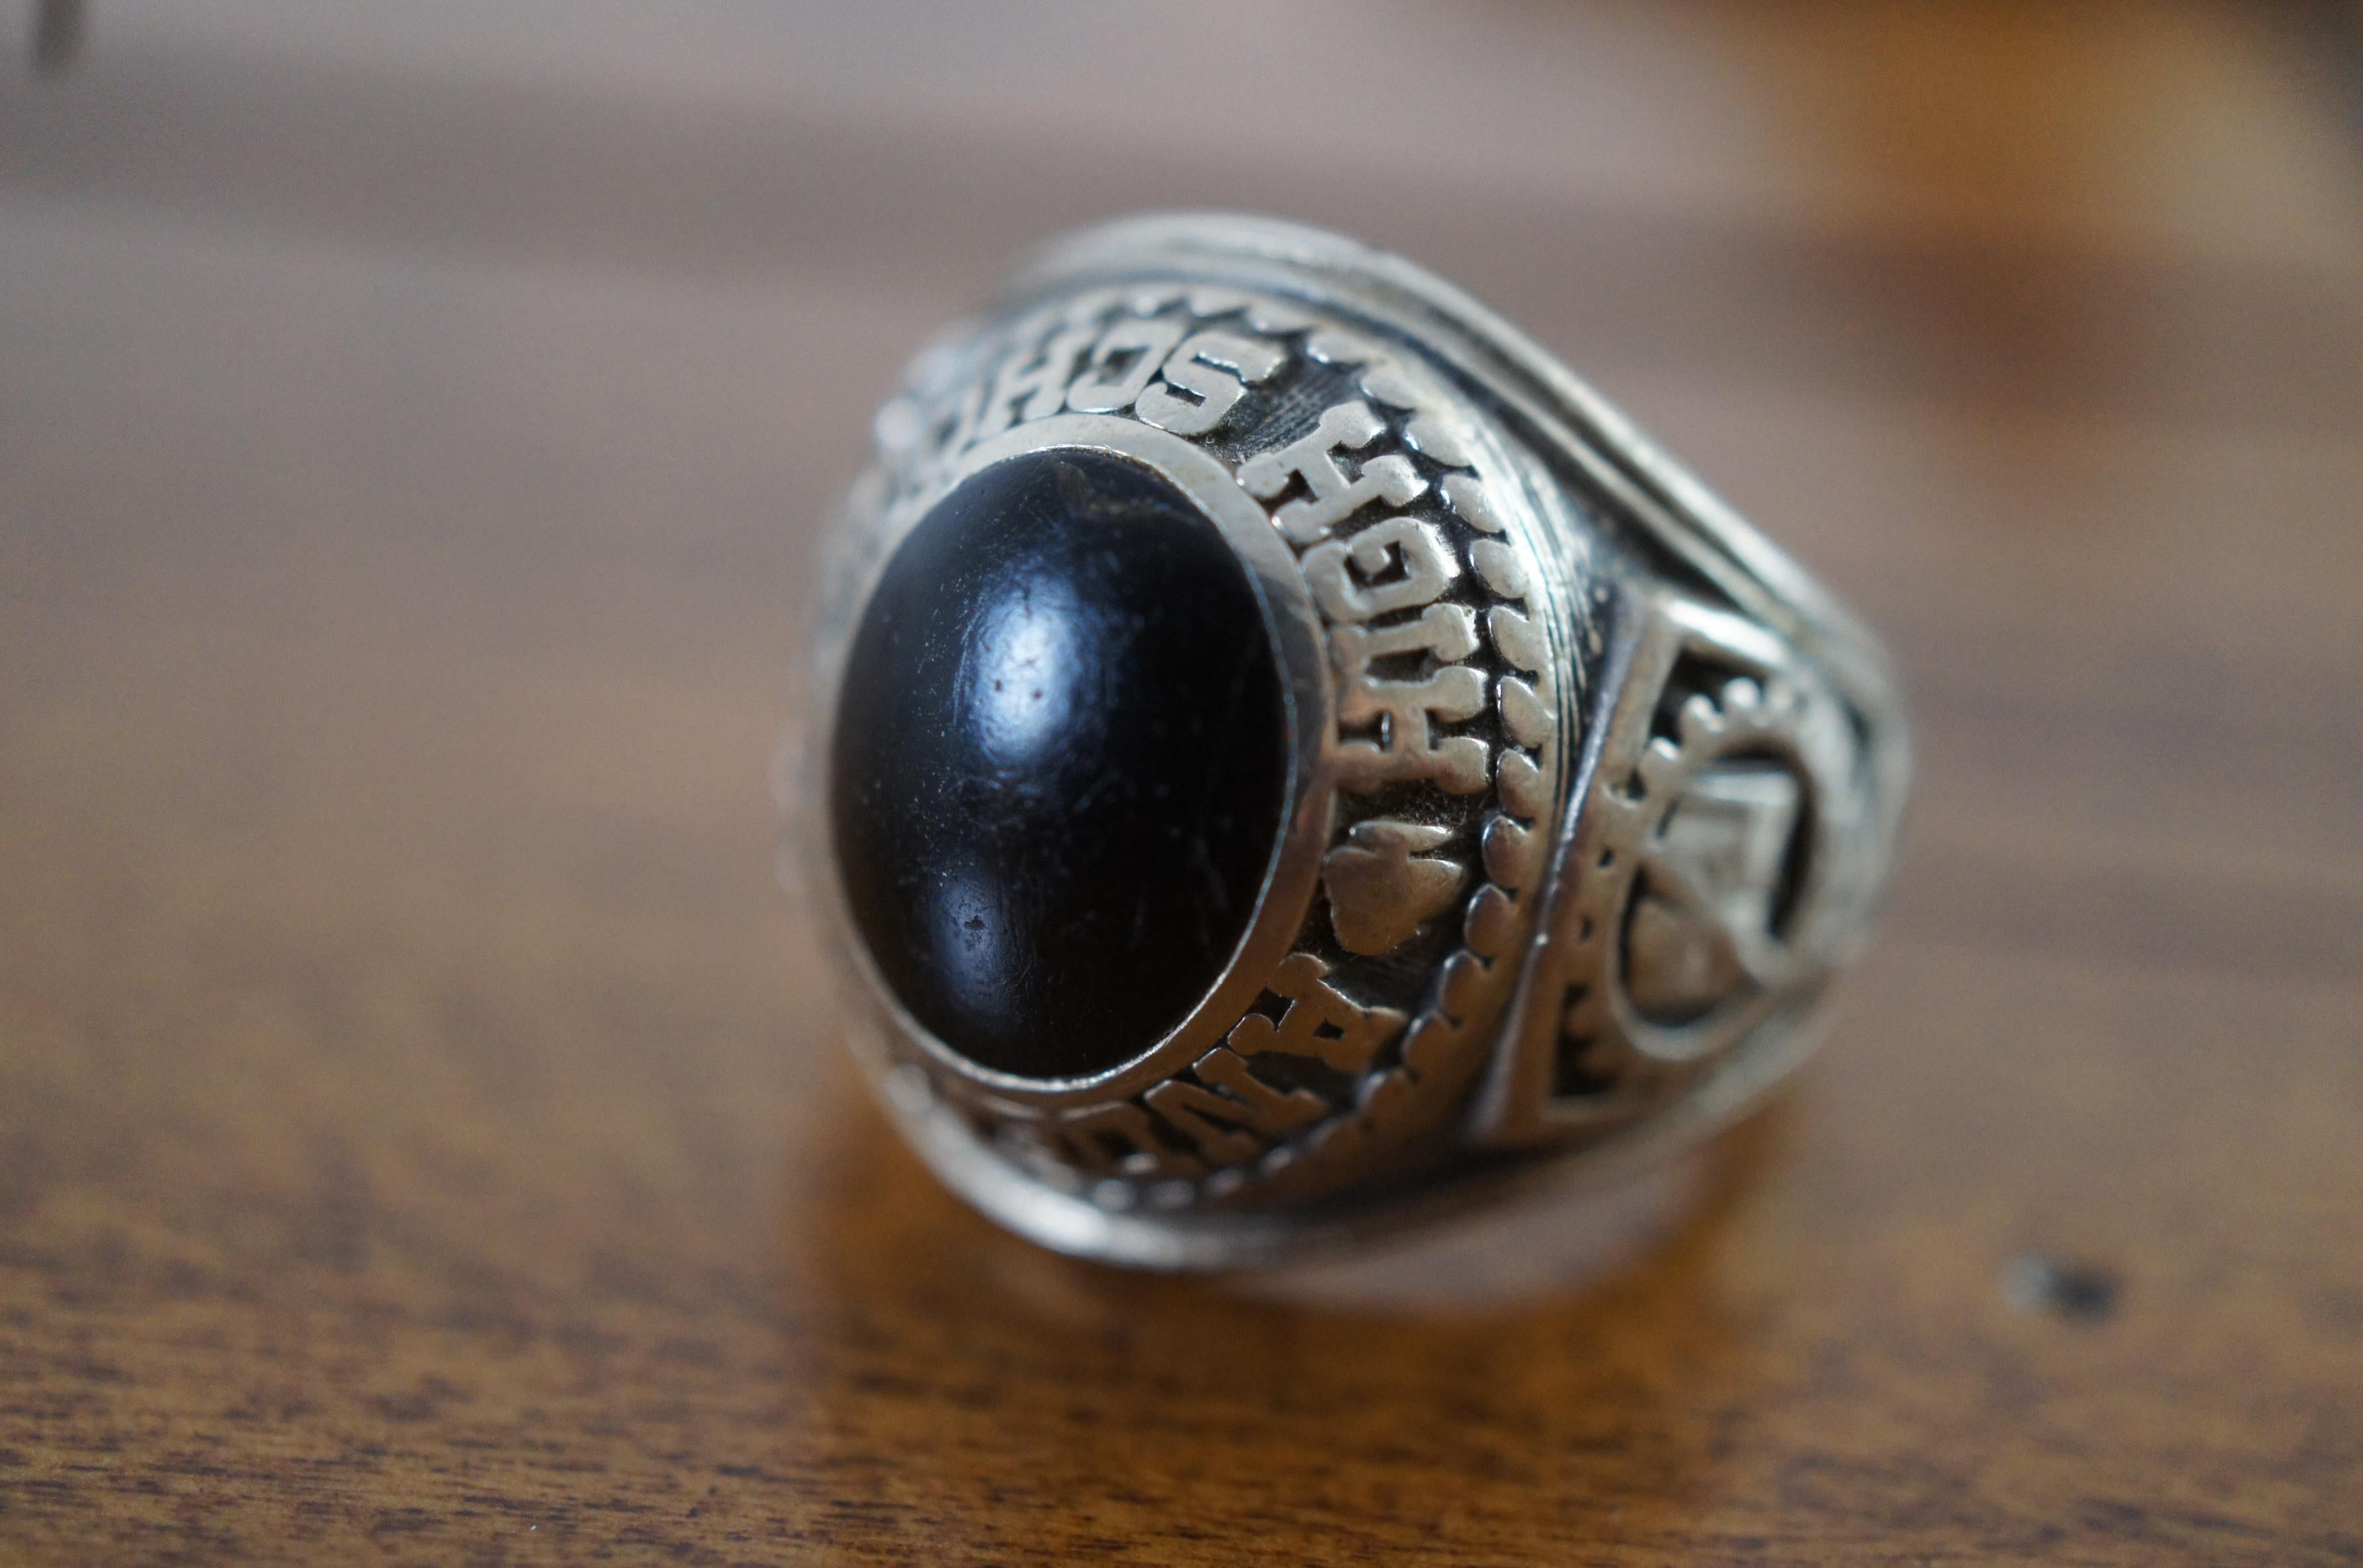 1974 Jostens 10k White Gold 15.5g Class Ring Anderson HS Arrowhead For Sale 5